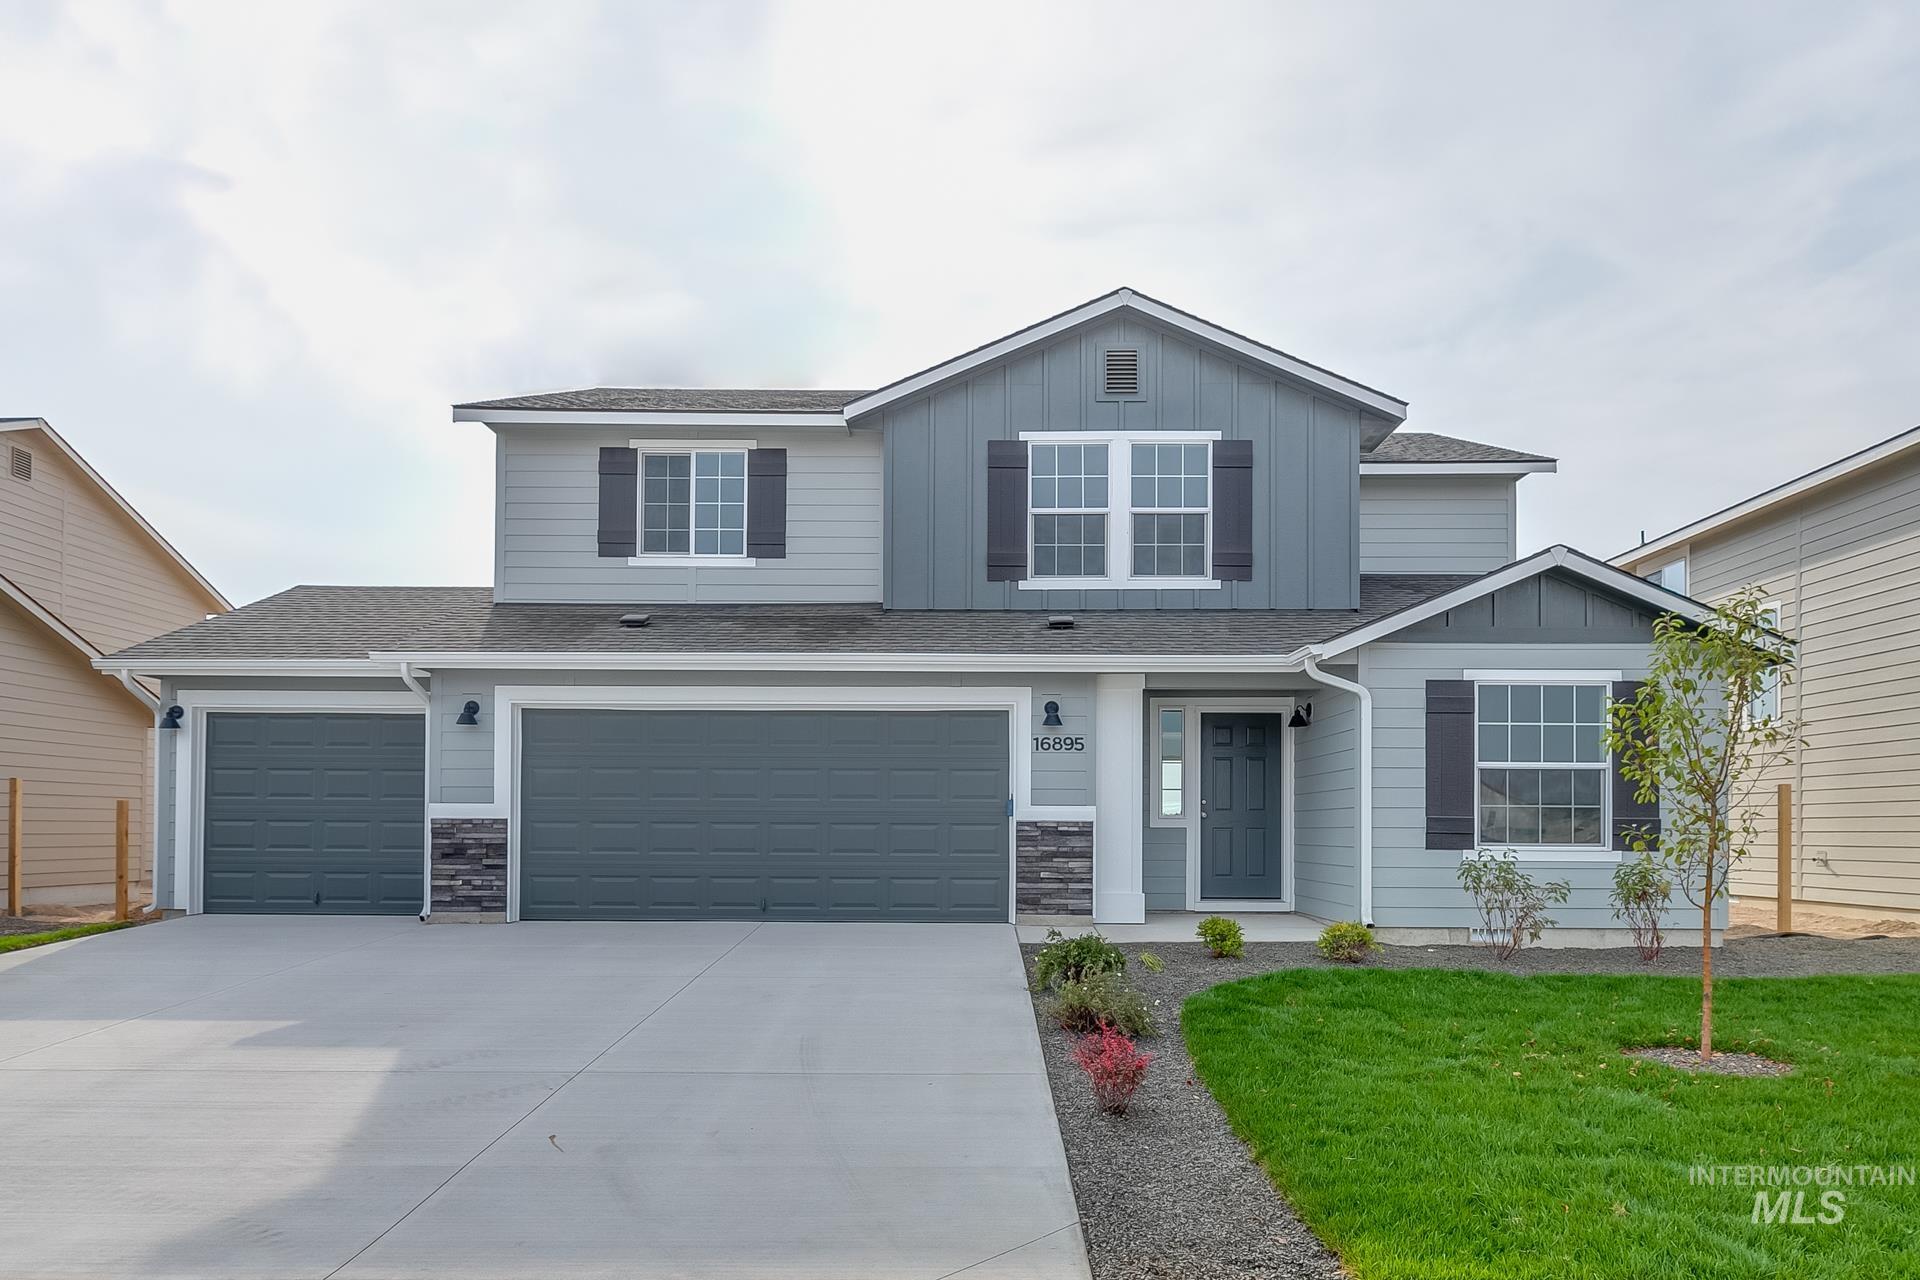 13109 S Laramie River Ave, Nampa, Idaho 83686, 4 Bedrooms, 2.5 Bathrooms, Residential For Sale, Price $434,990, 98845876